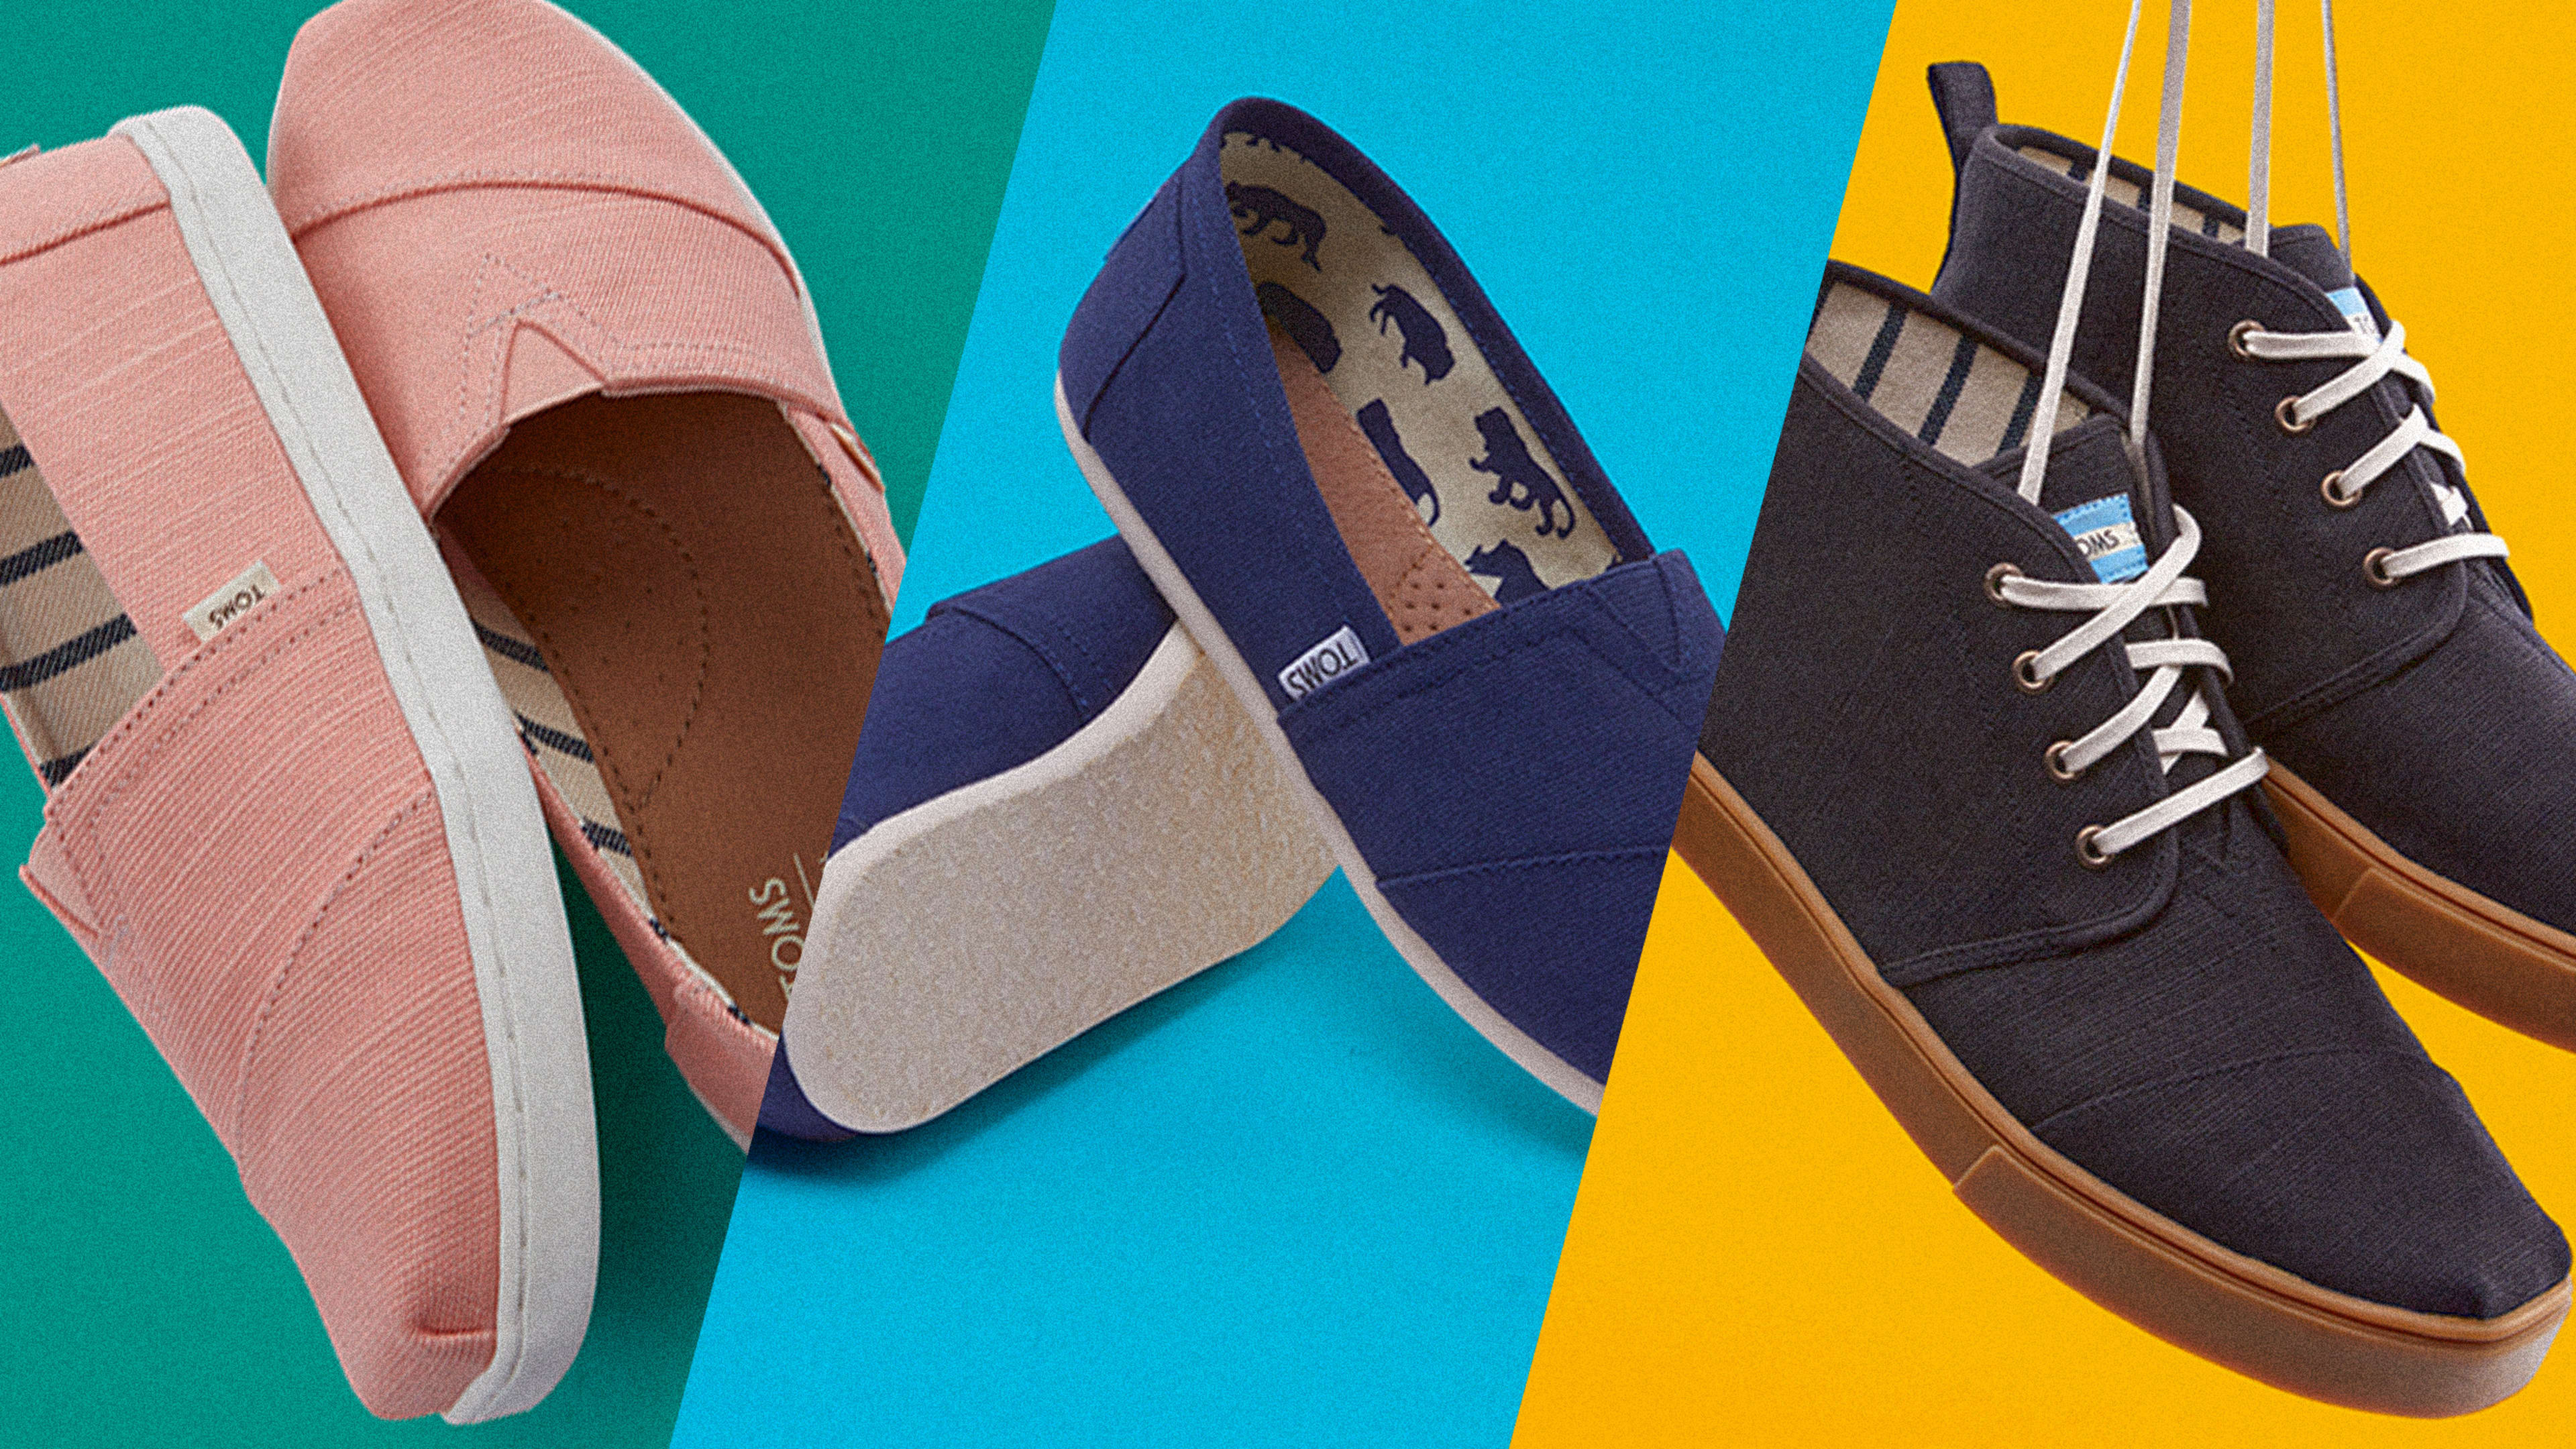 Toms made buy-one, give-one famous. Now it’s updating the model